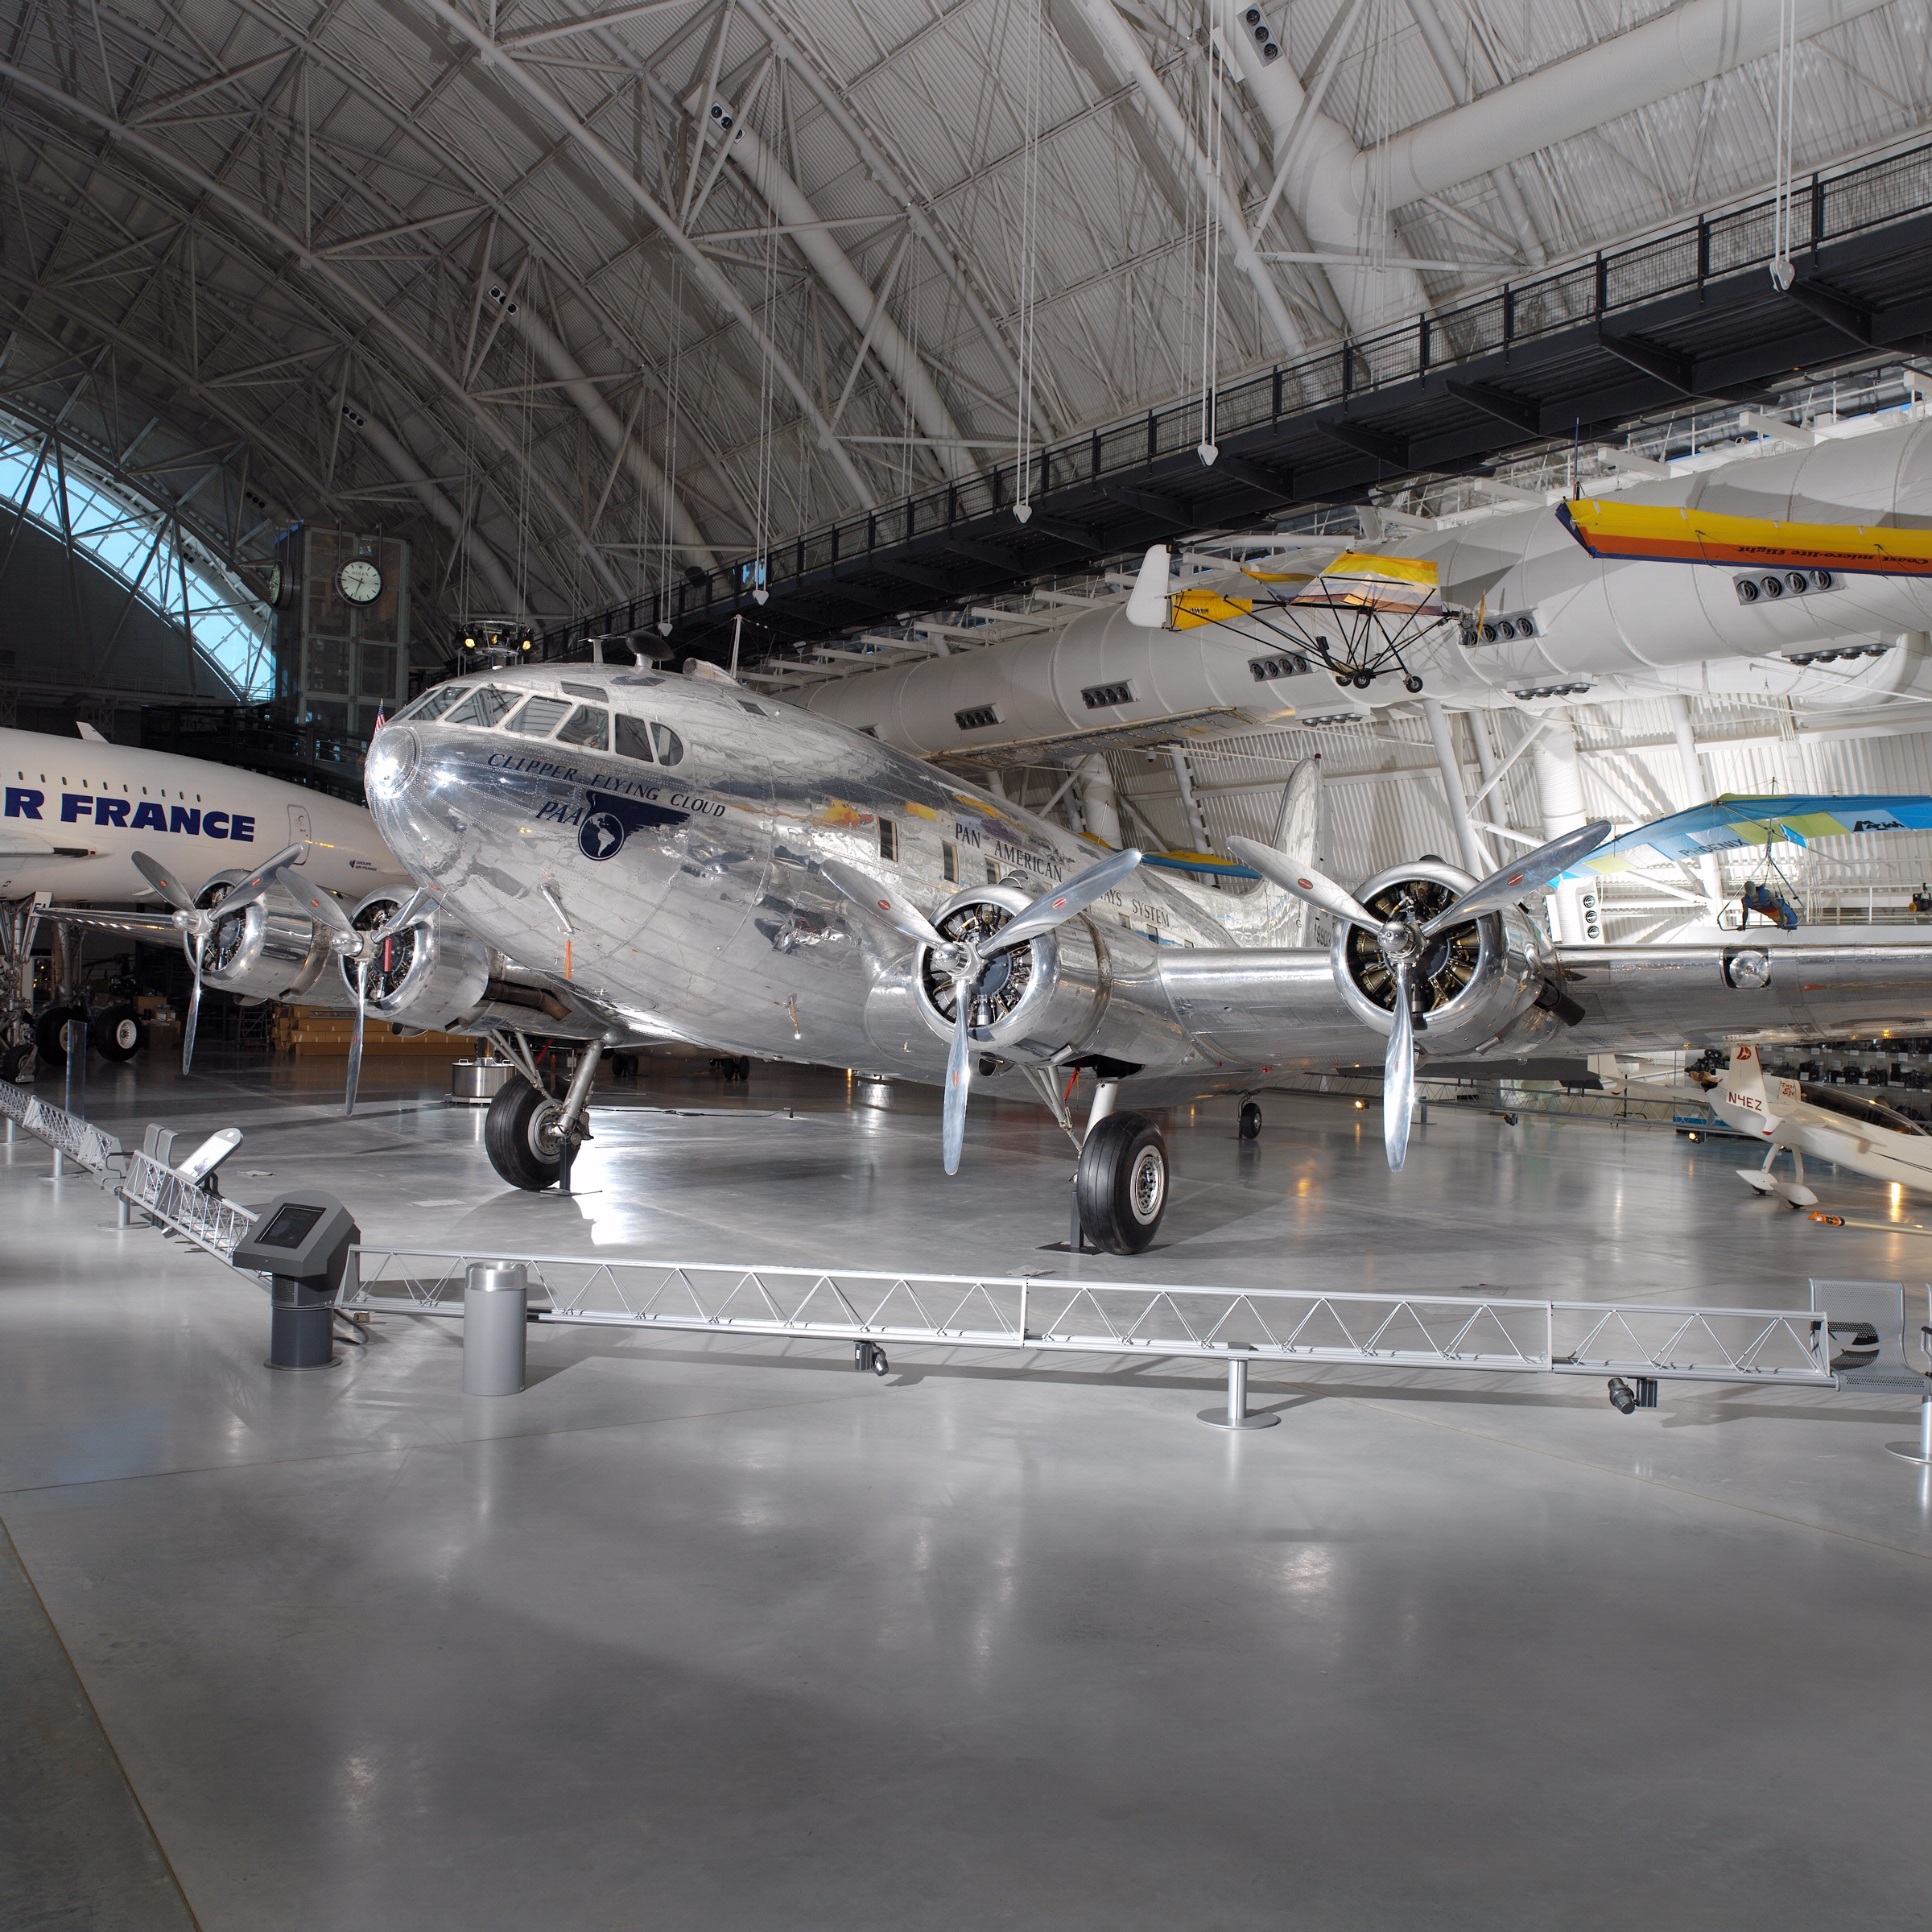 The only existing Boeing Model 307 Stratoliner, NC19903, Clipper Flying Cloud, at the Smithsonian Institution National Air and Space Museum, Steven F. Udvar-Hazy Center. (Photo by Dane Penland, National Air and Space Museum, Smithsonian Institution)